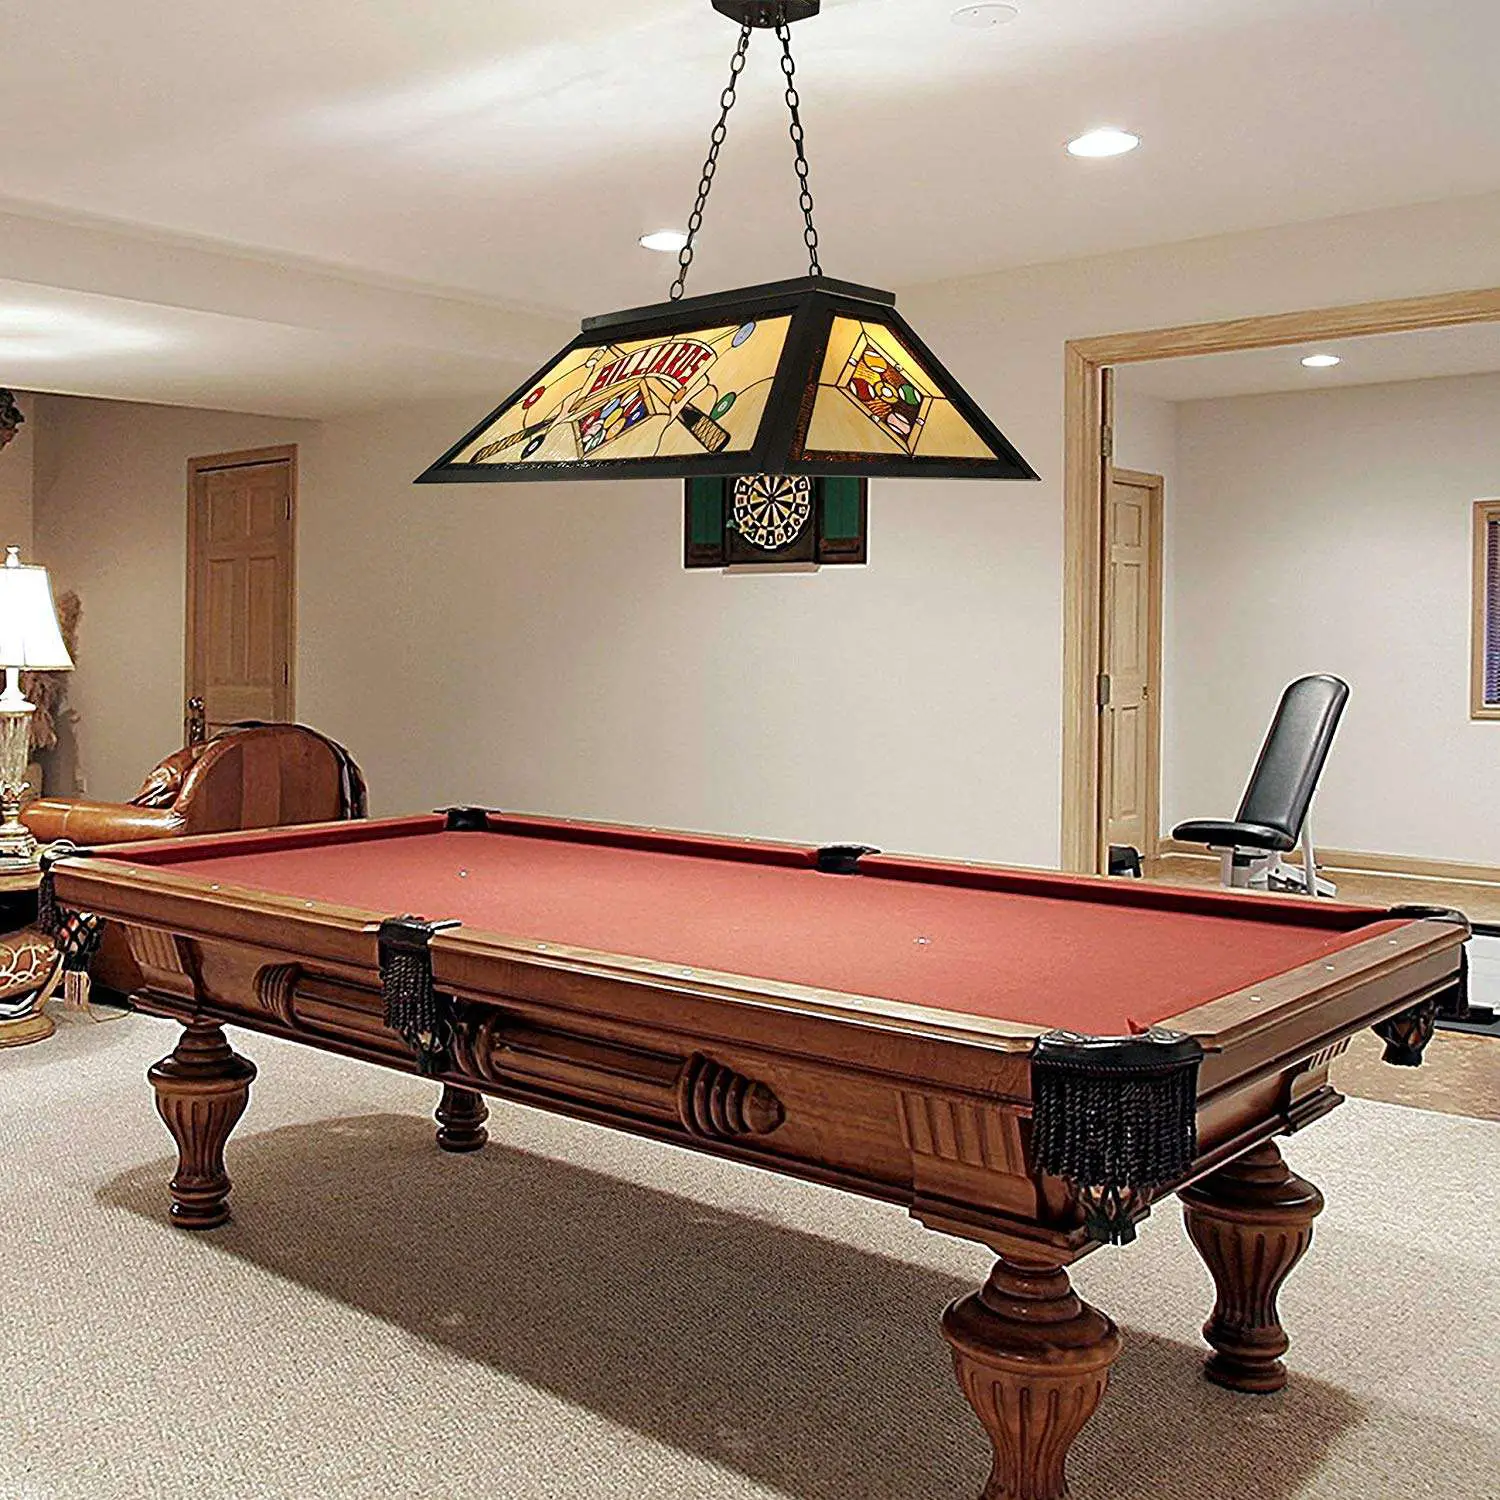 Light Fixture For Pool Table